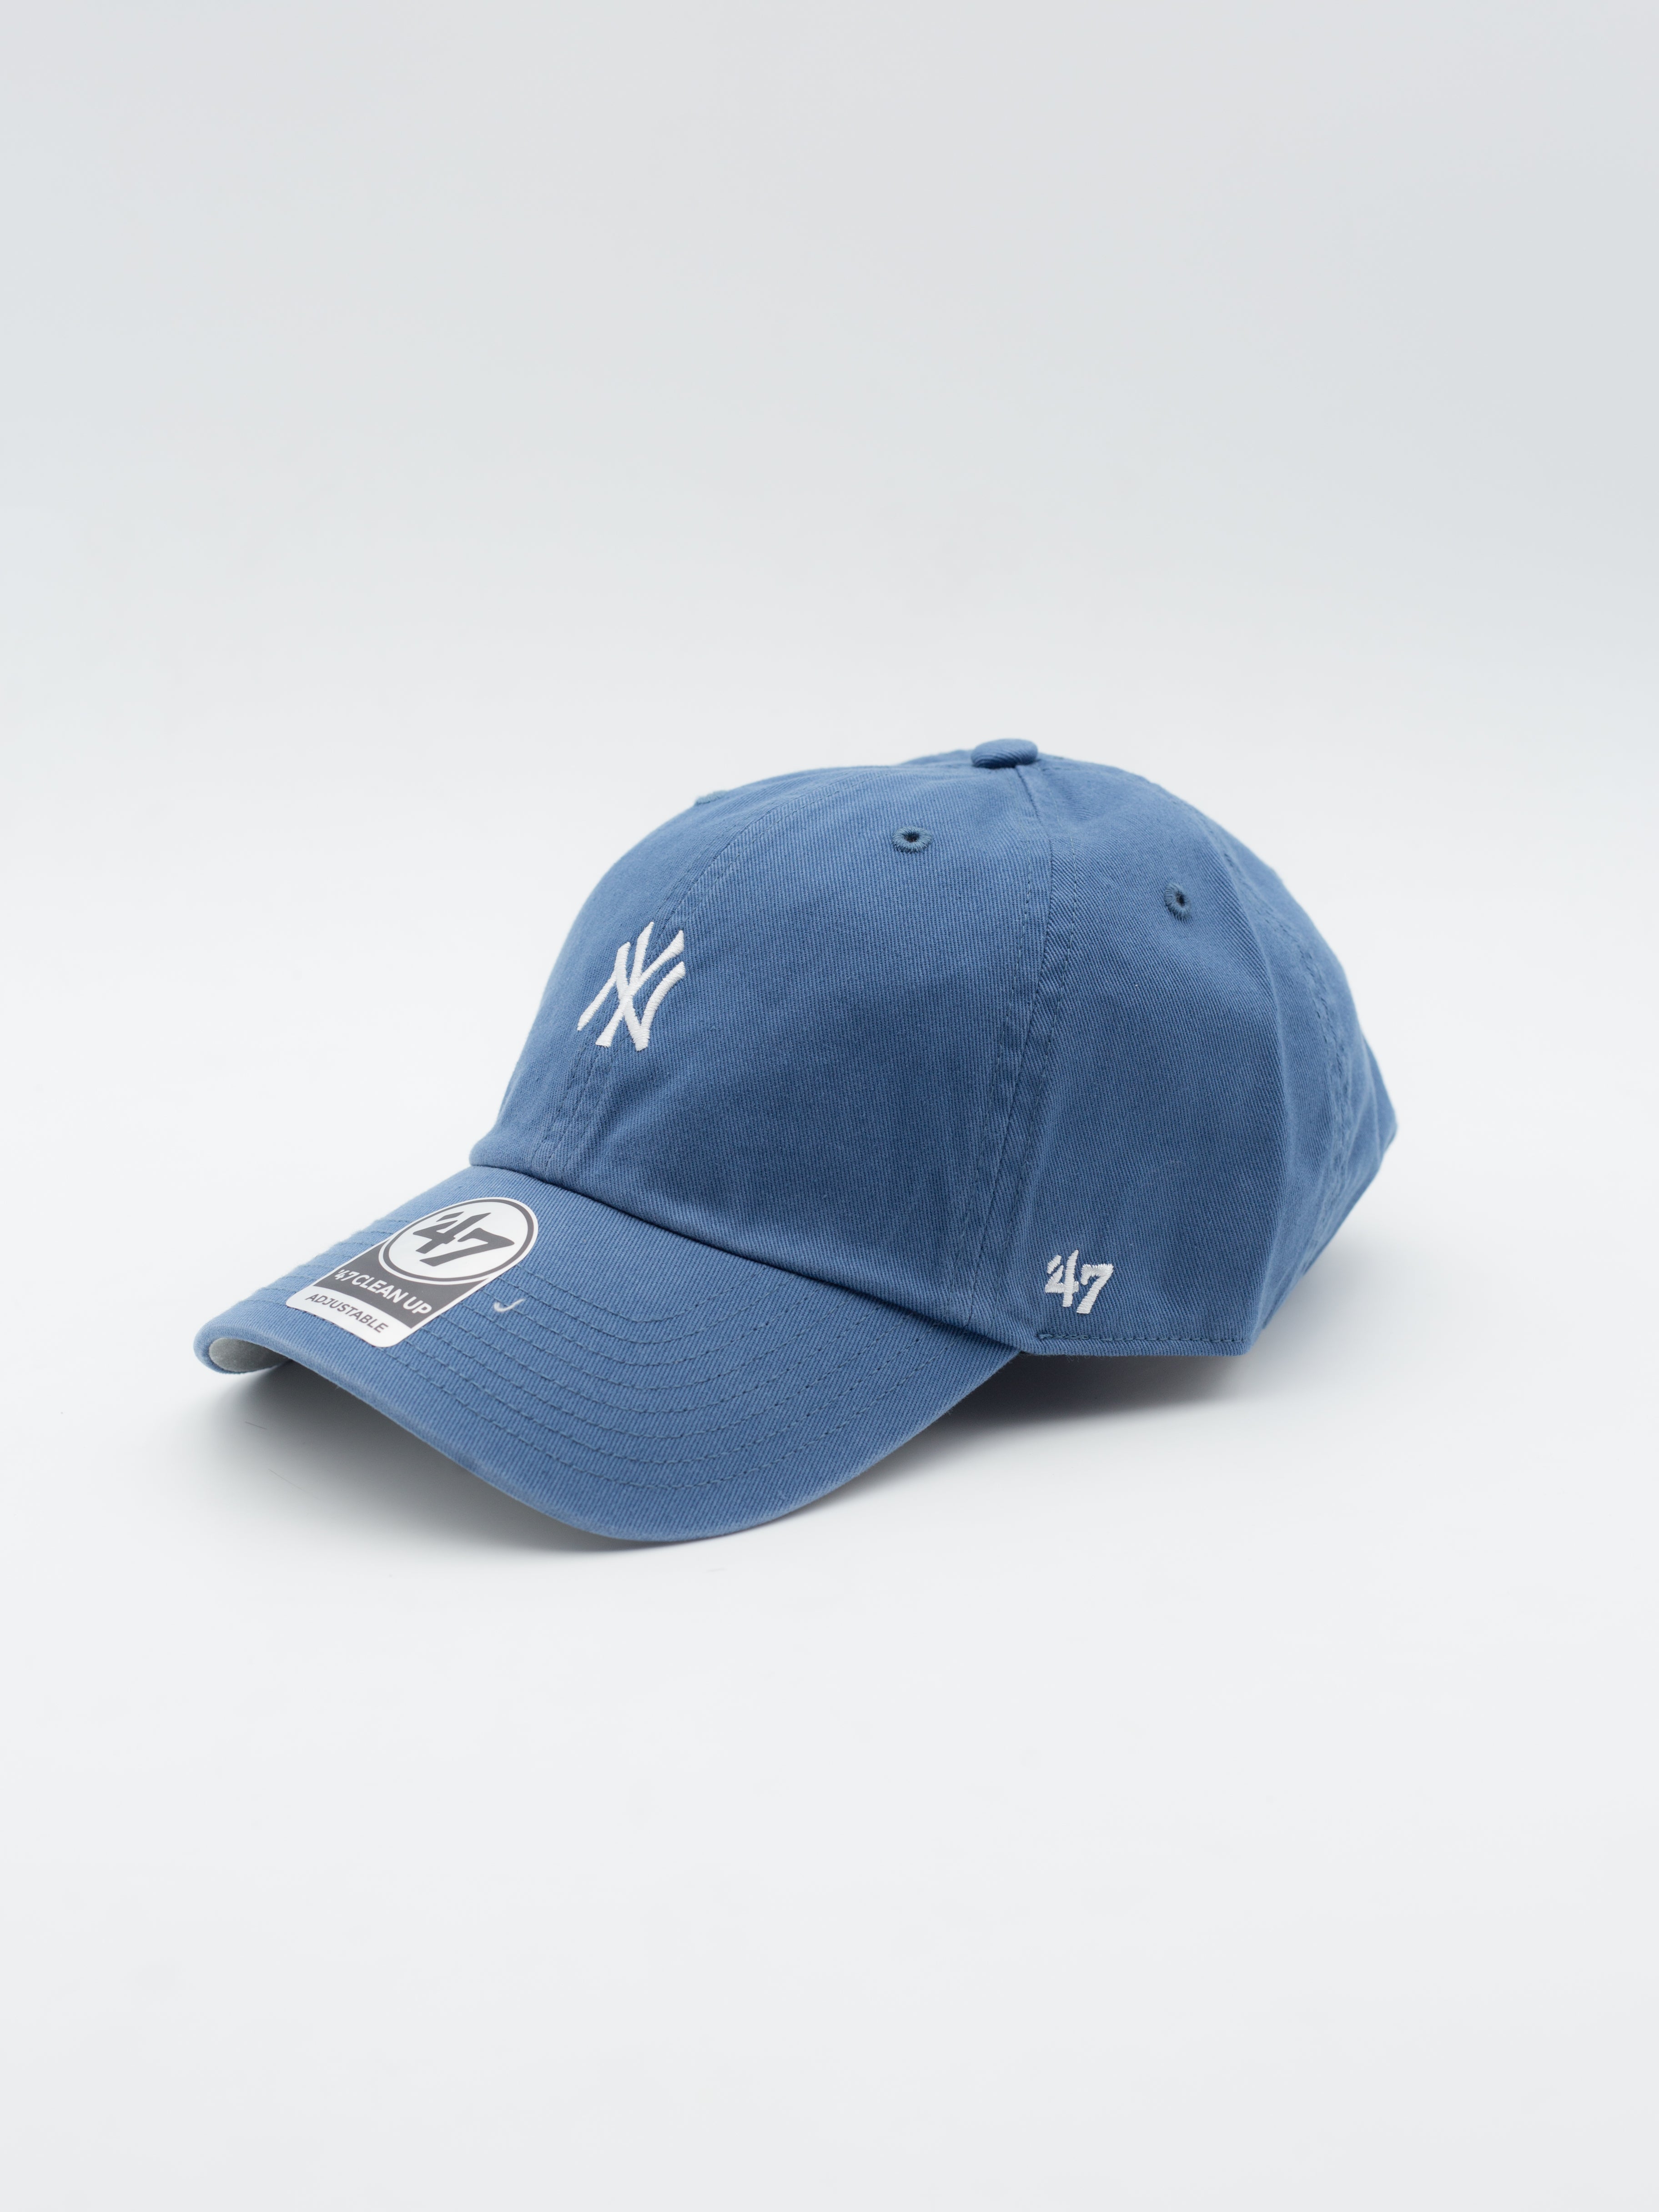 CLEAN UP New York Yankees Minilogo Timber Blue